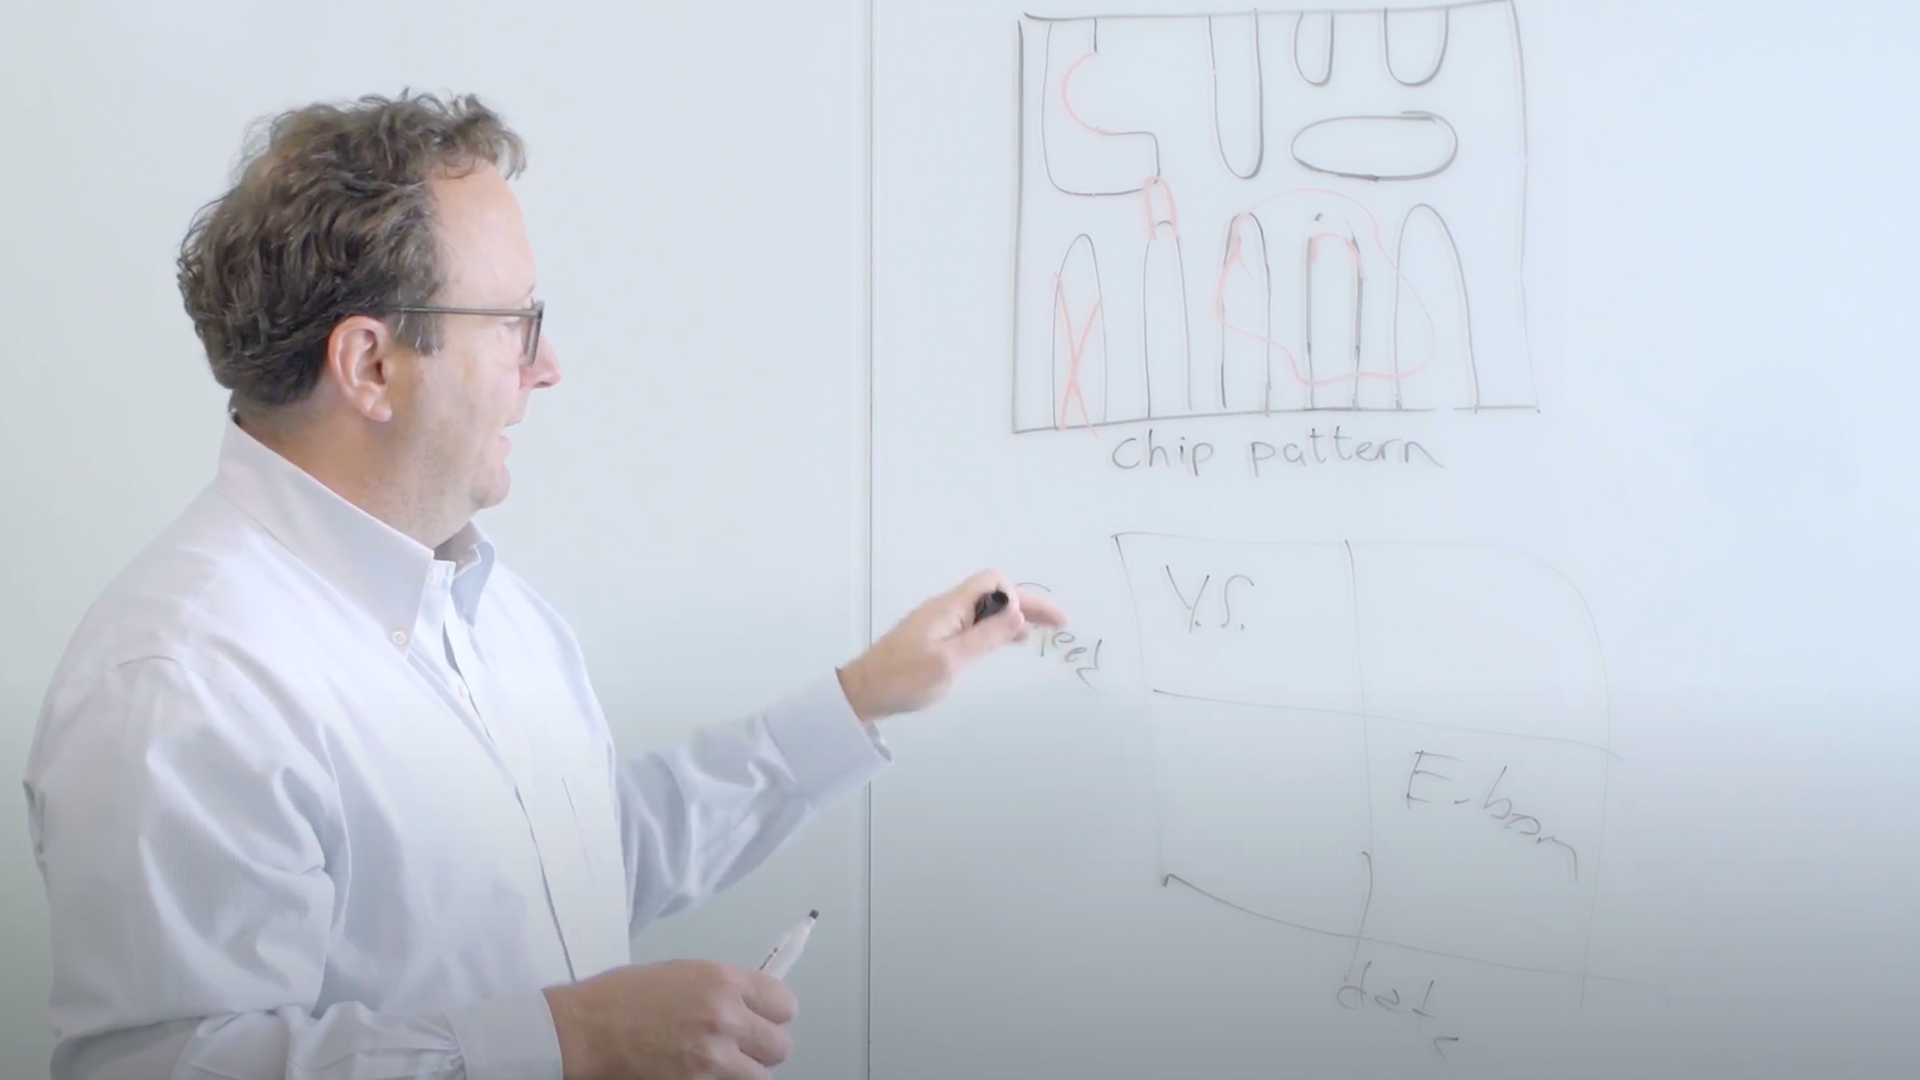 ASML researcher Scott Middlebrooks explains pattern defectivity in a whiteboard session